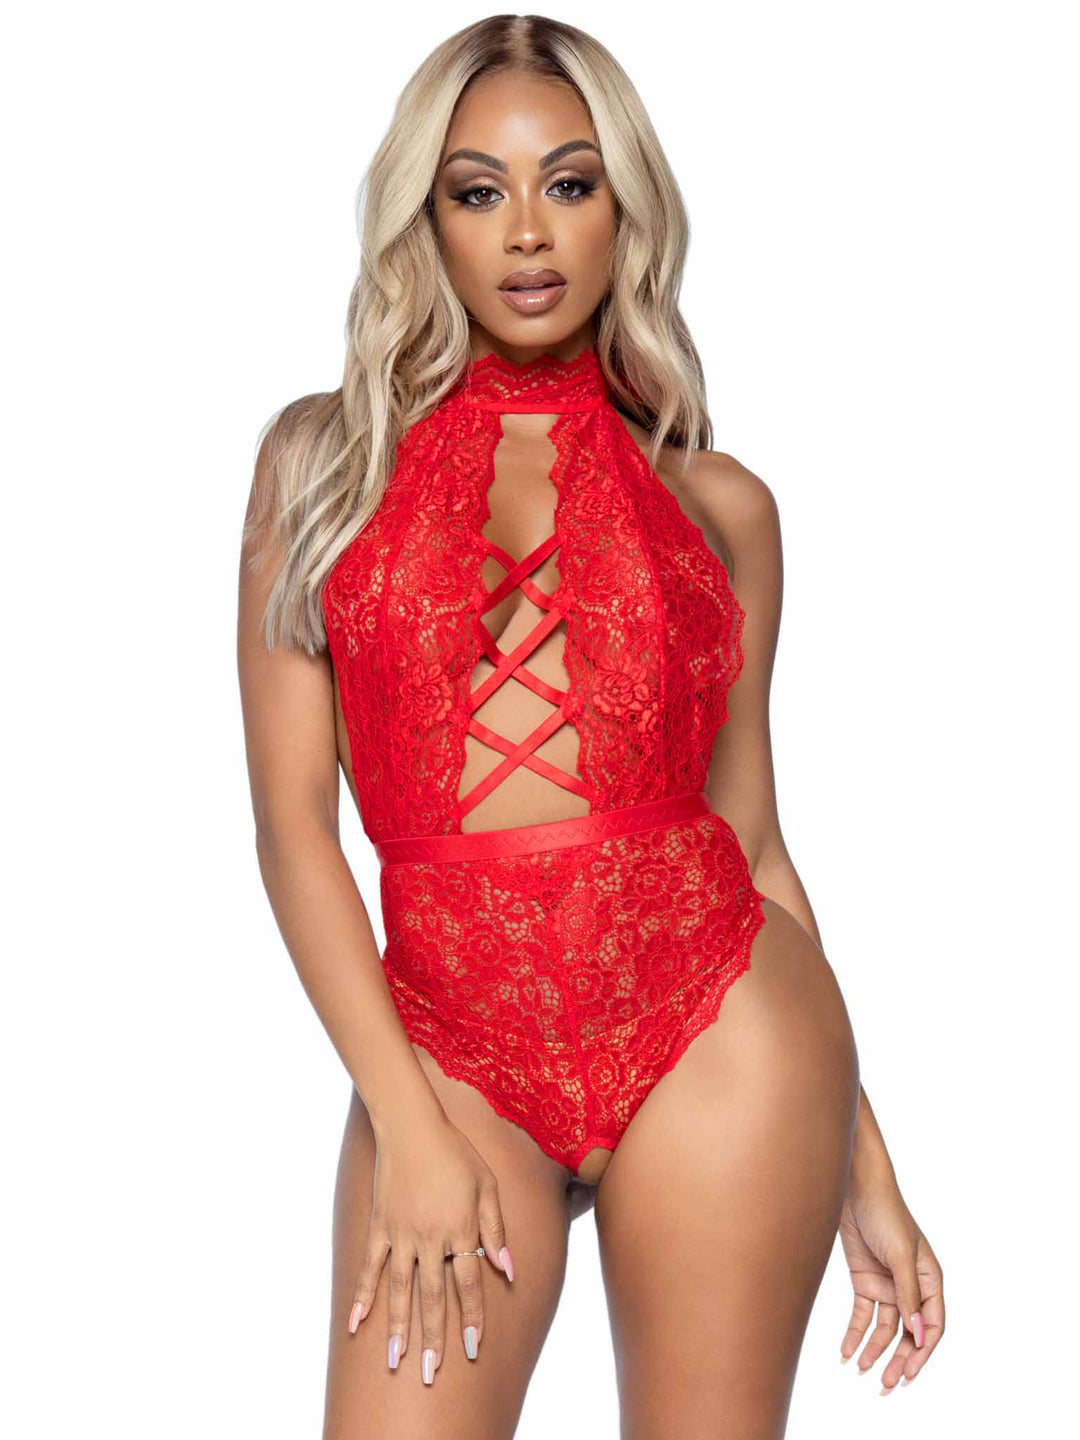 Backless Halter Lace Teddy with Lace Up Accents and Crotchless Thong